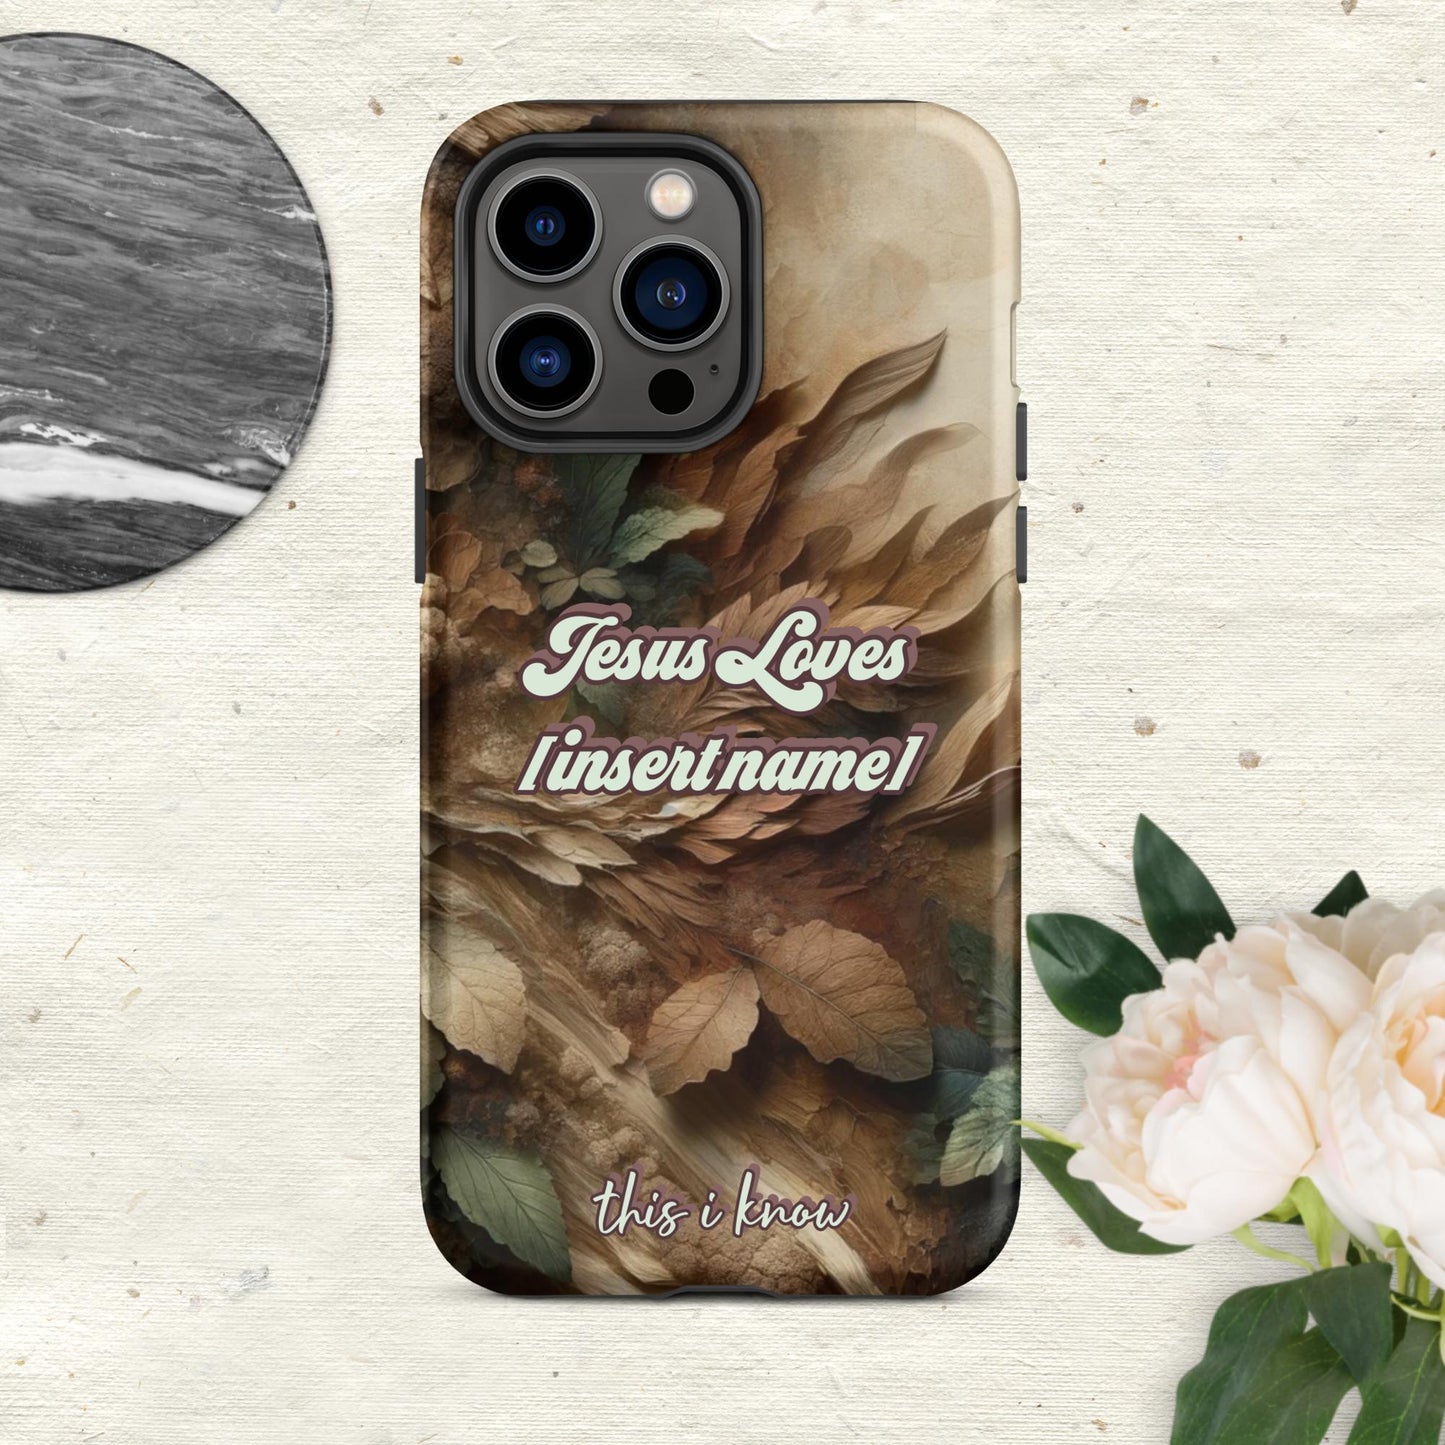 Trendyguard Matte / iPhone 14 Pro Max Jesus Loves [insertname] This I Know | Custom Tough Case for iPhone®